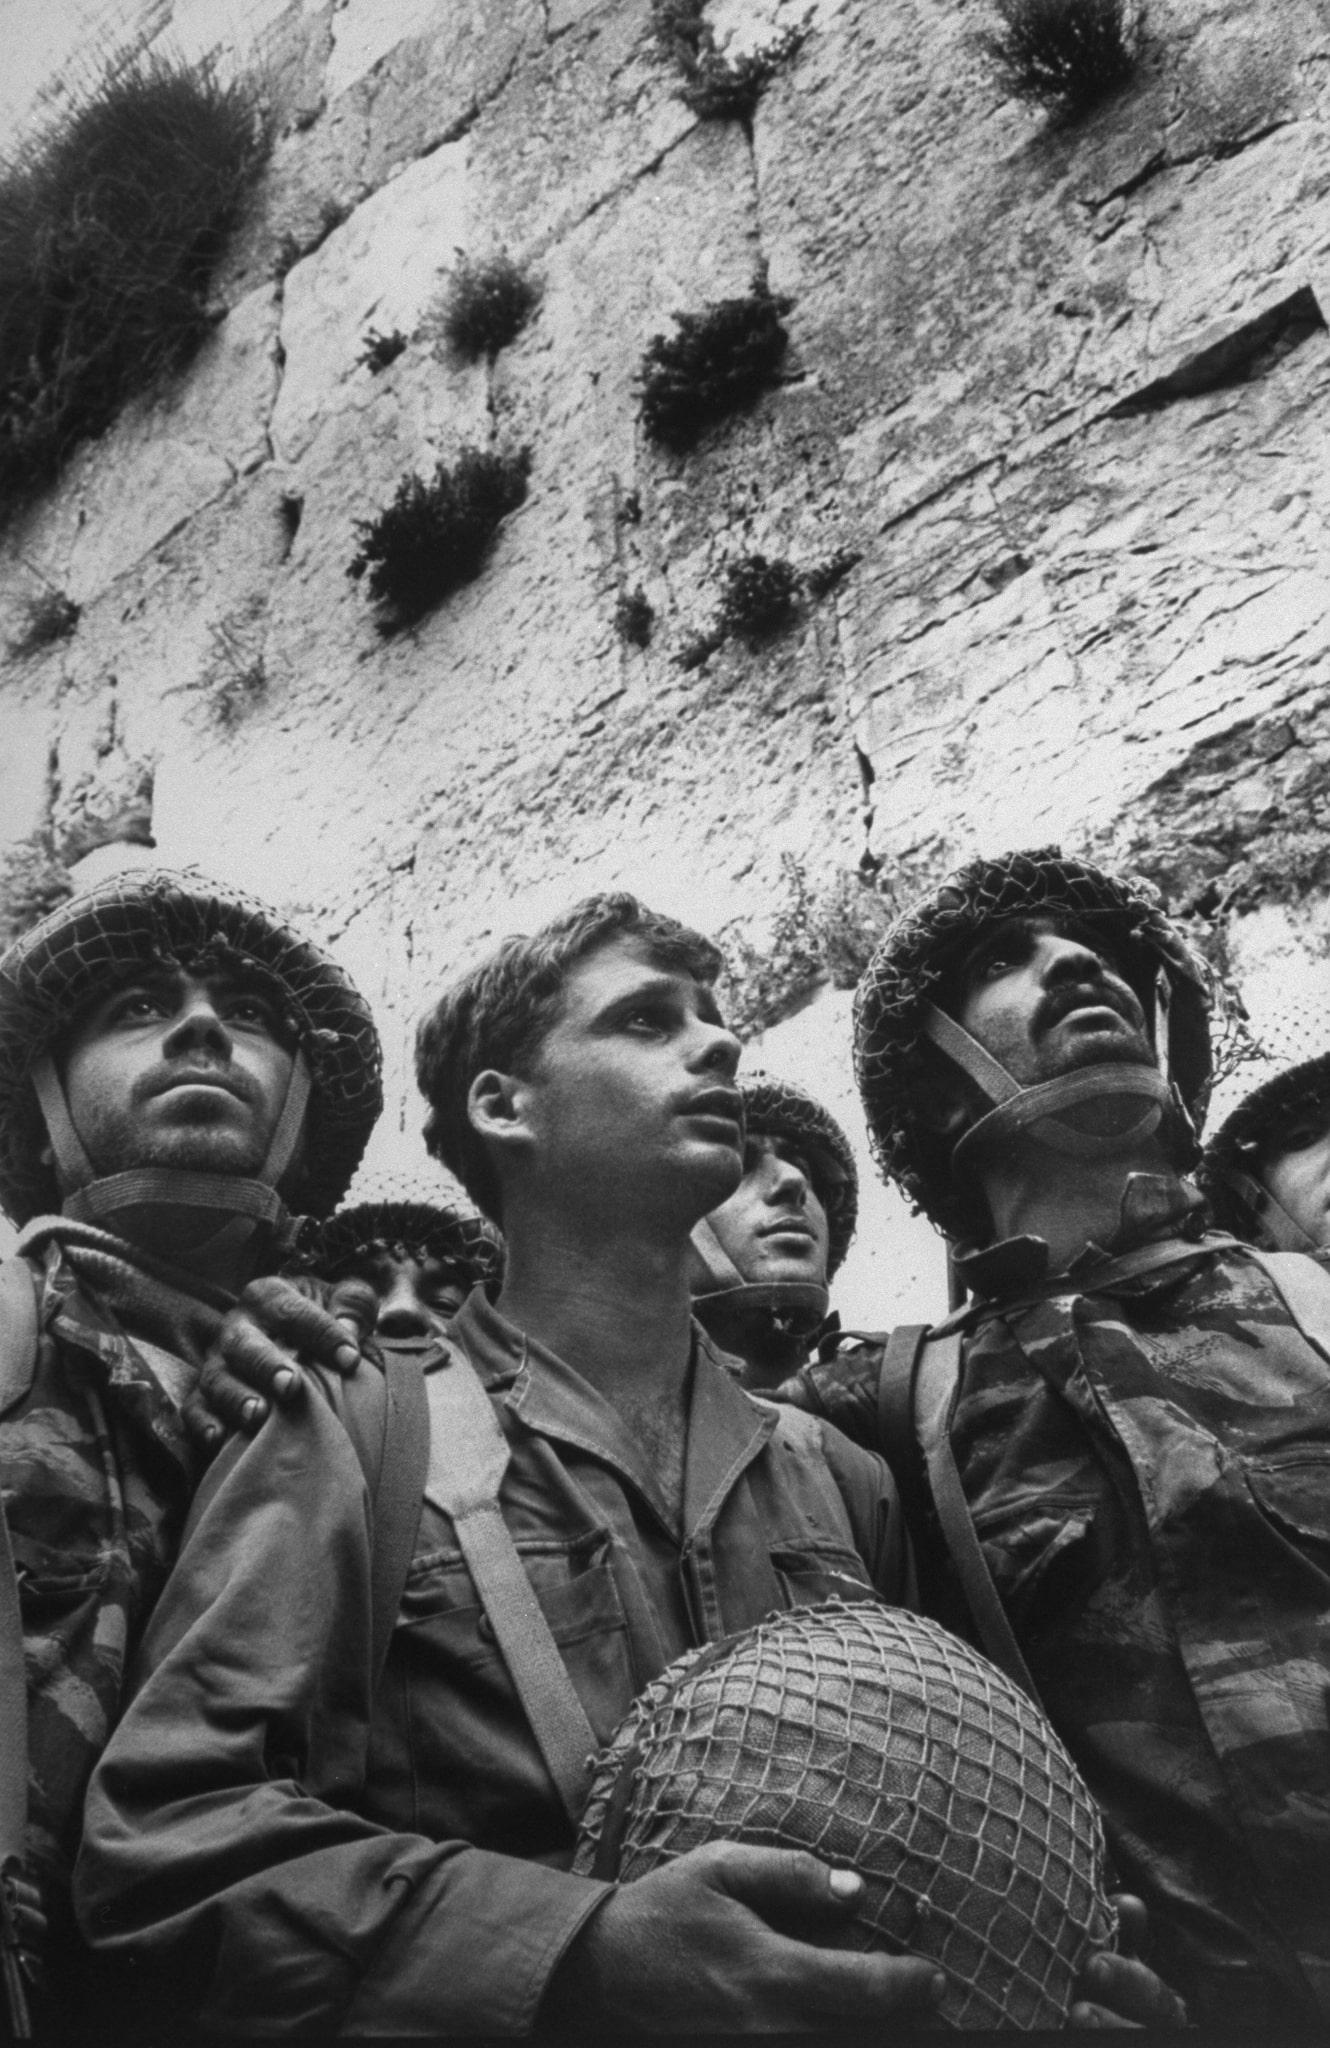 Photograph of three soldiers in uniform looking to their left standing in front of the Western Wall, with central soldier holding helmet in his hands.